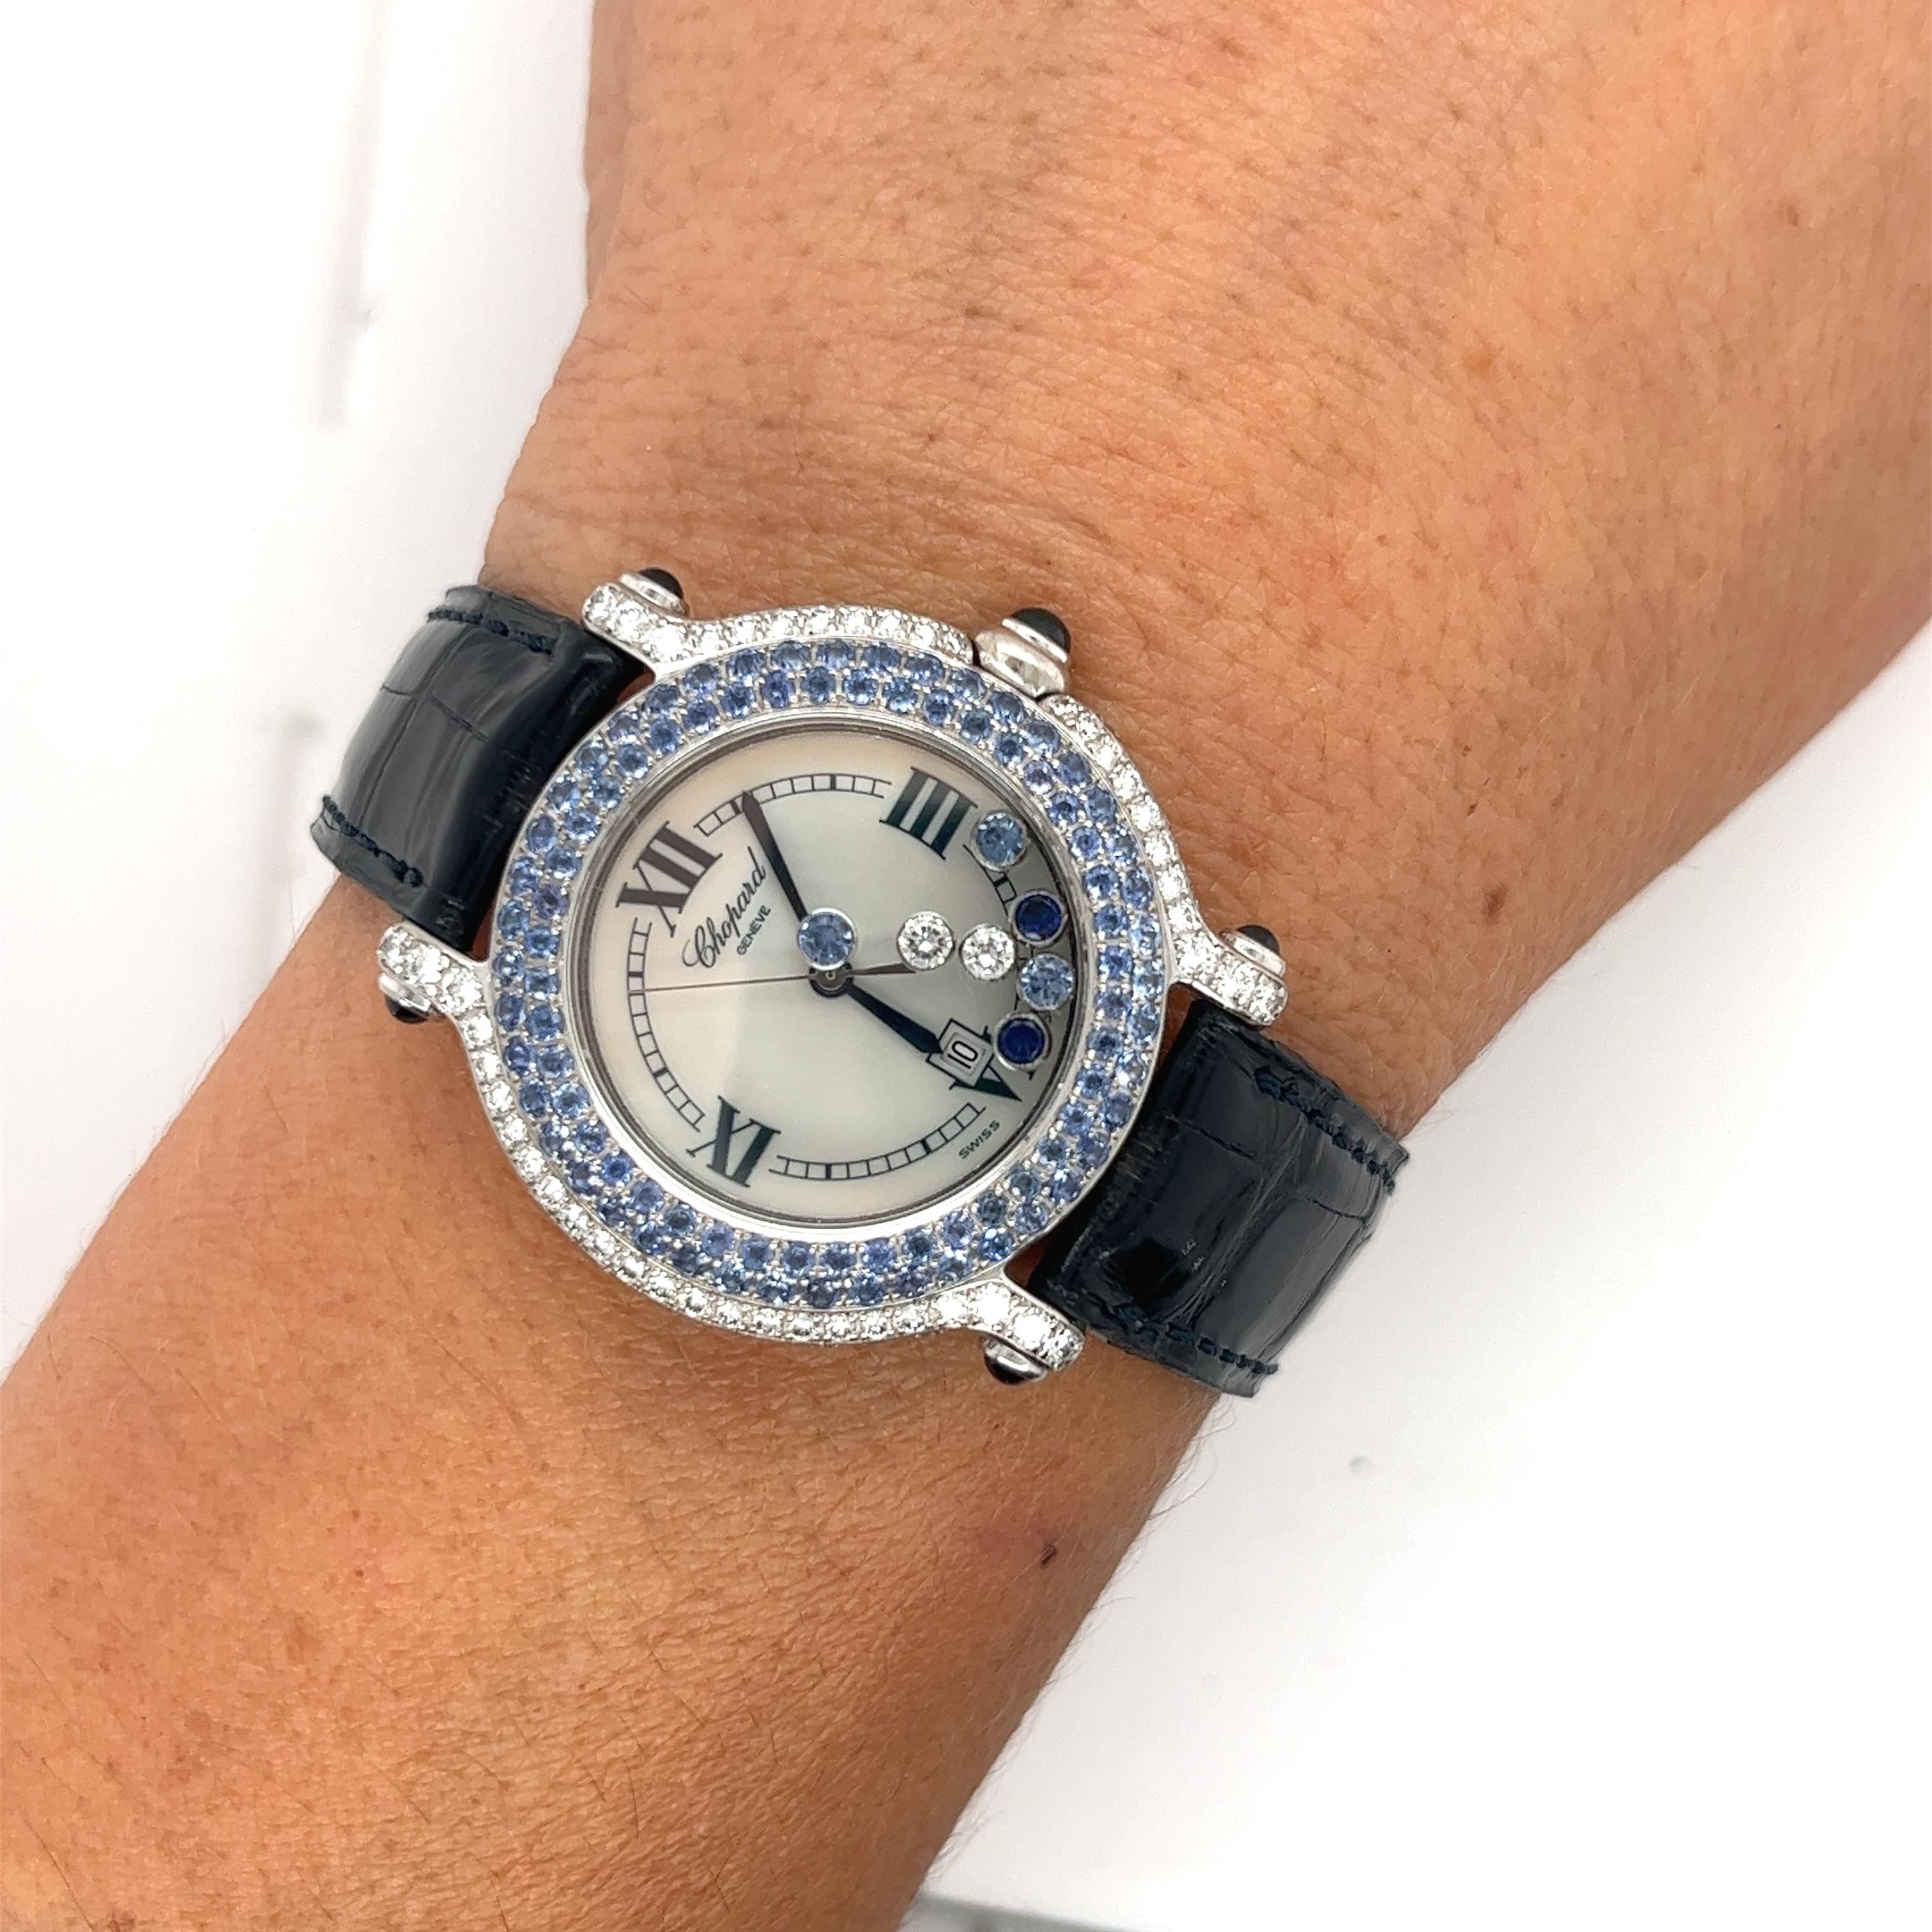 Chopard Happy Sport 18k white gold 33mm quartz ladies watch with crocodile skin leather strap. Set with round and cabochon cut Blue Sapphires and Diamonds around the bezel, case, and crown. Wide lugs set with cabochon cut Blue Sapphires. Featuring